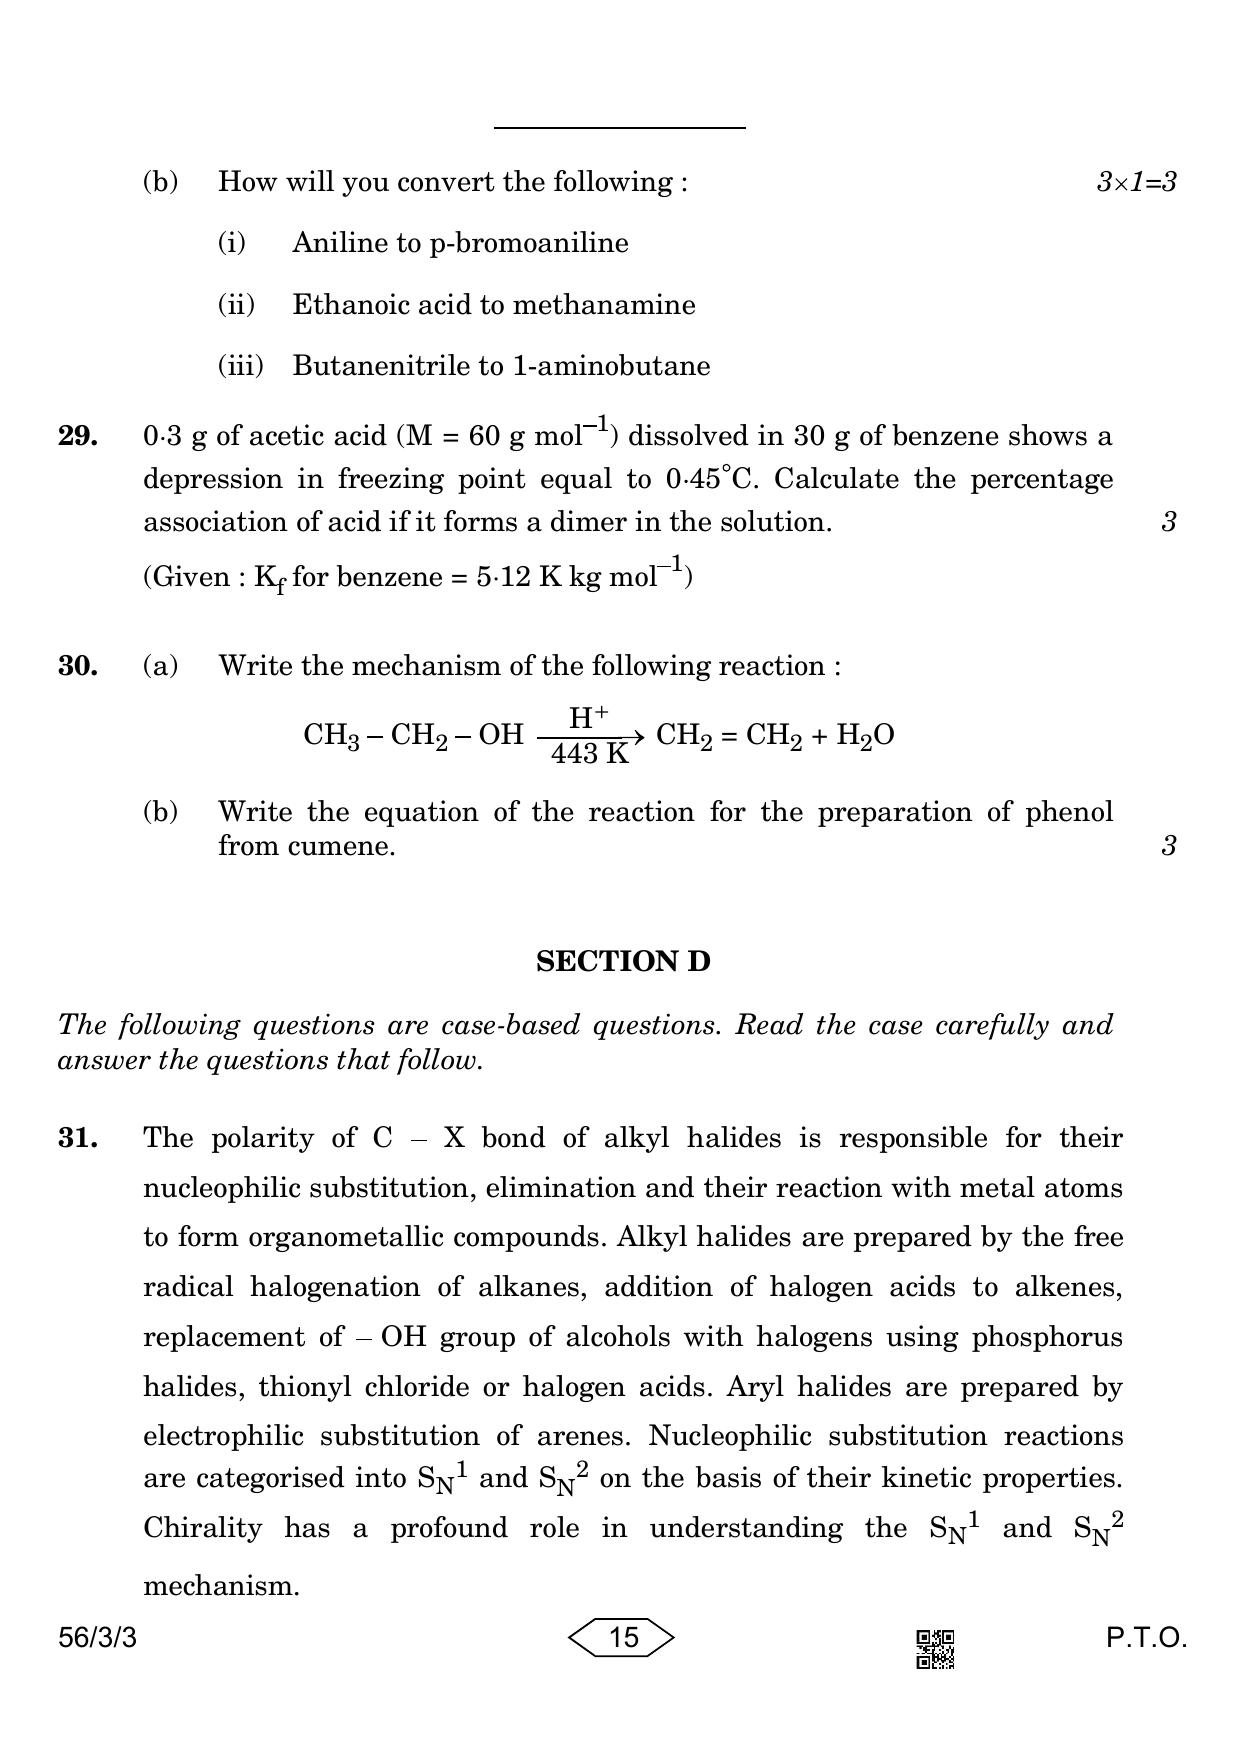 CBSE Class 12 56-3-3 Chemistry 2023 Question Paper - Page 15